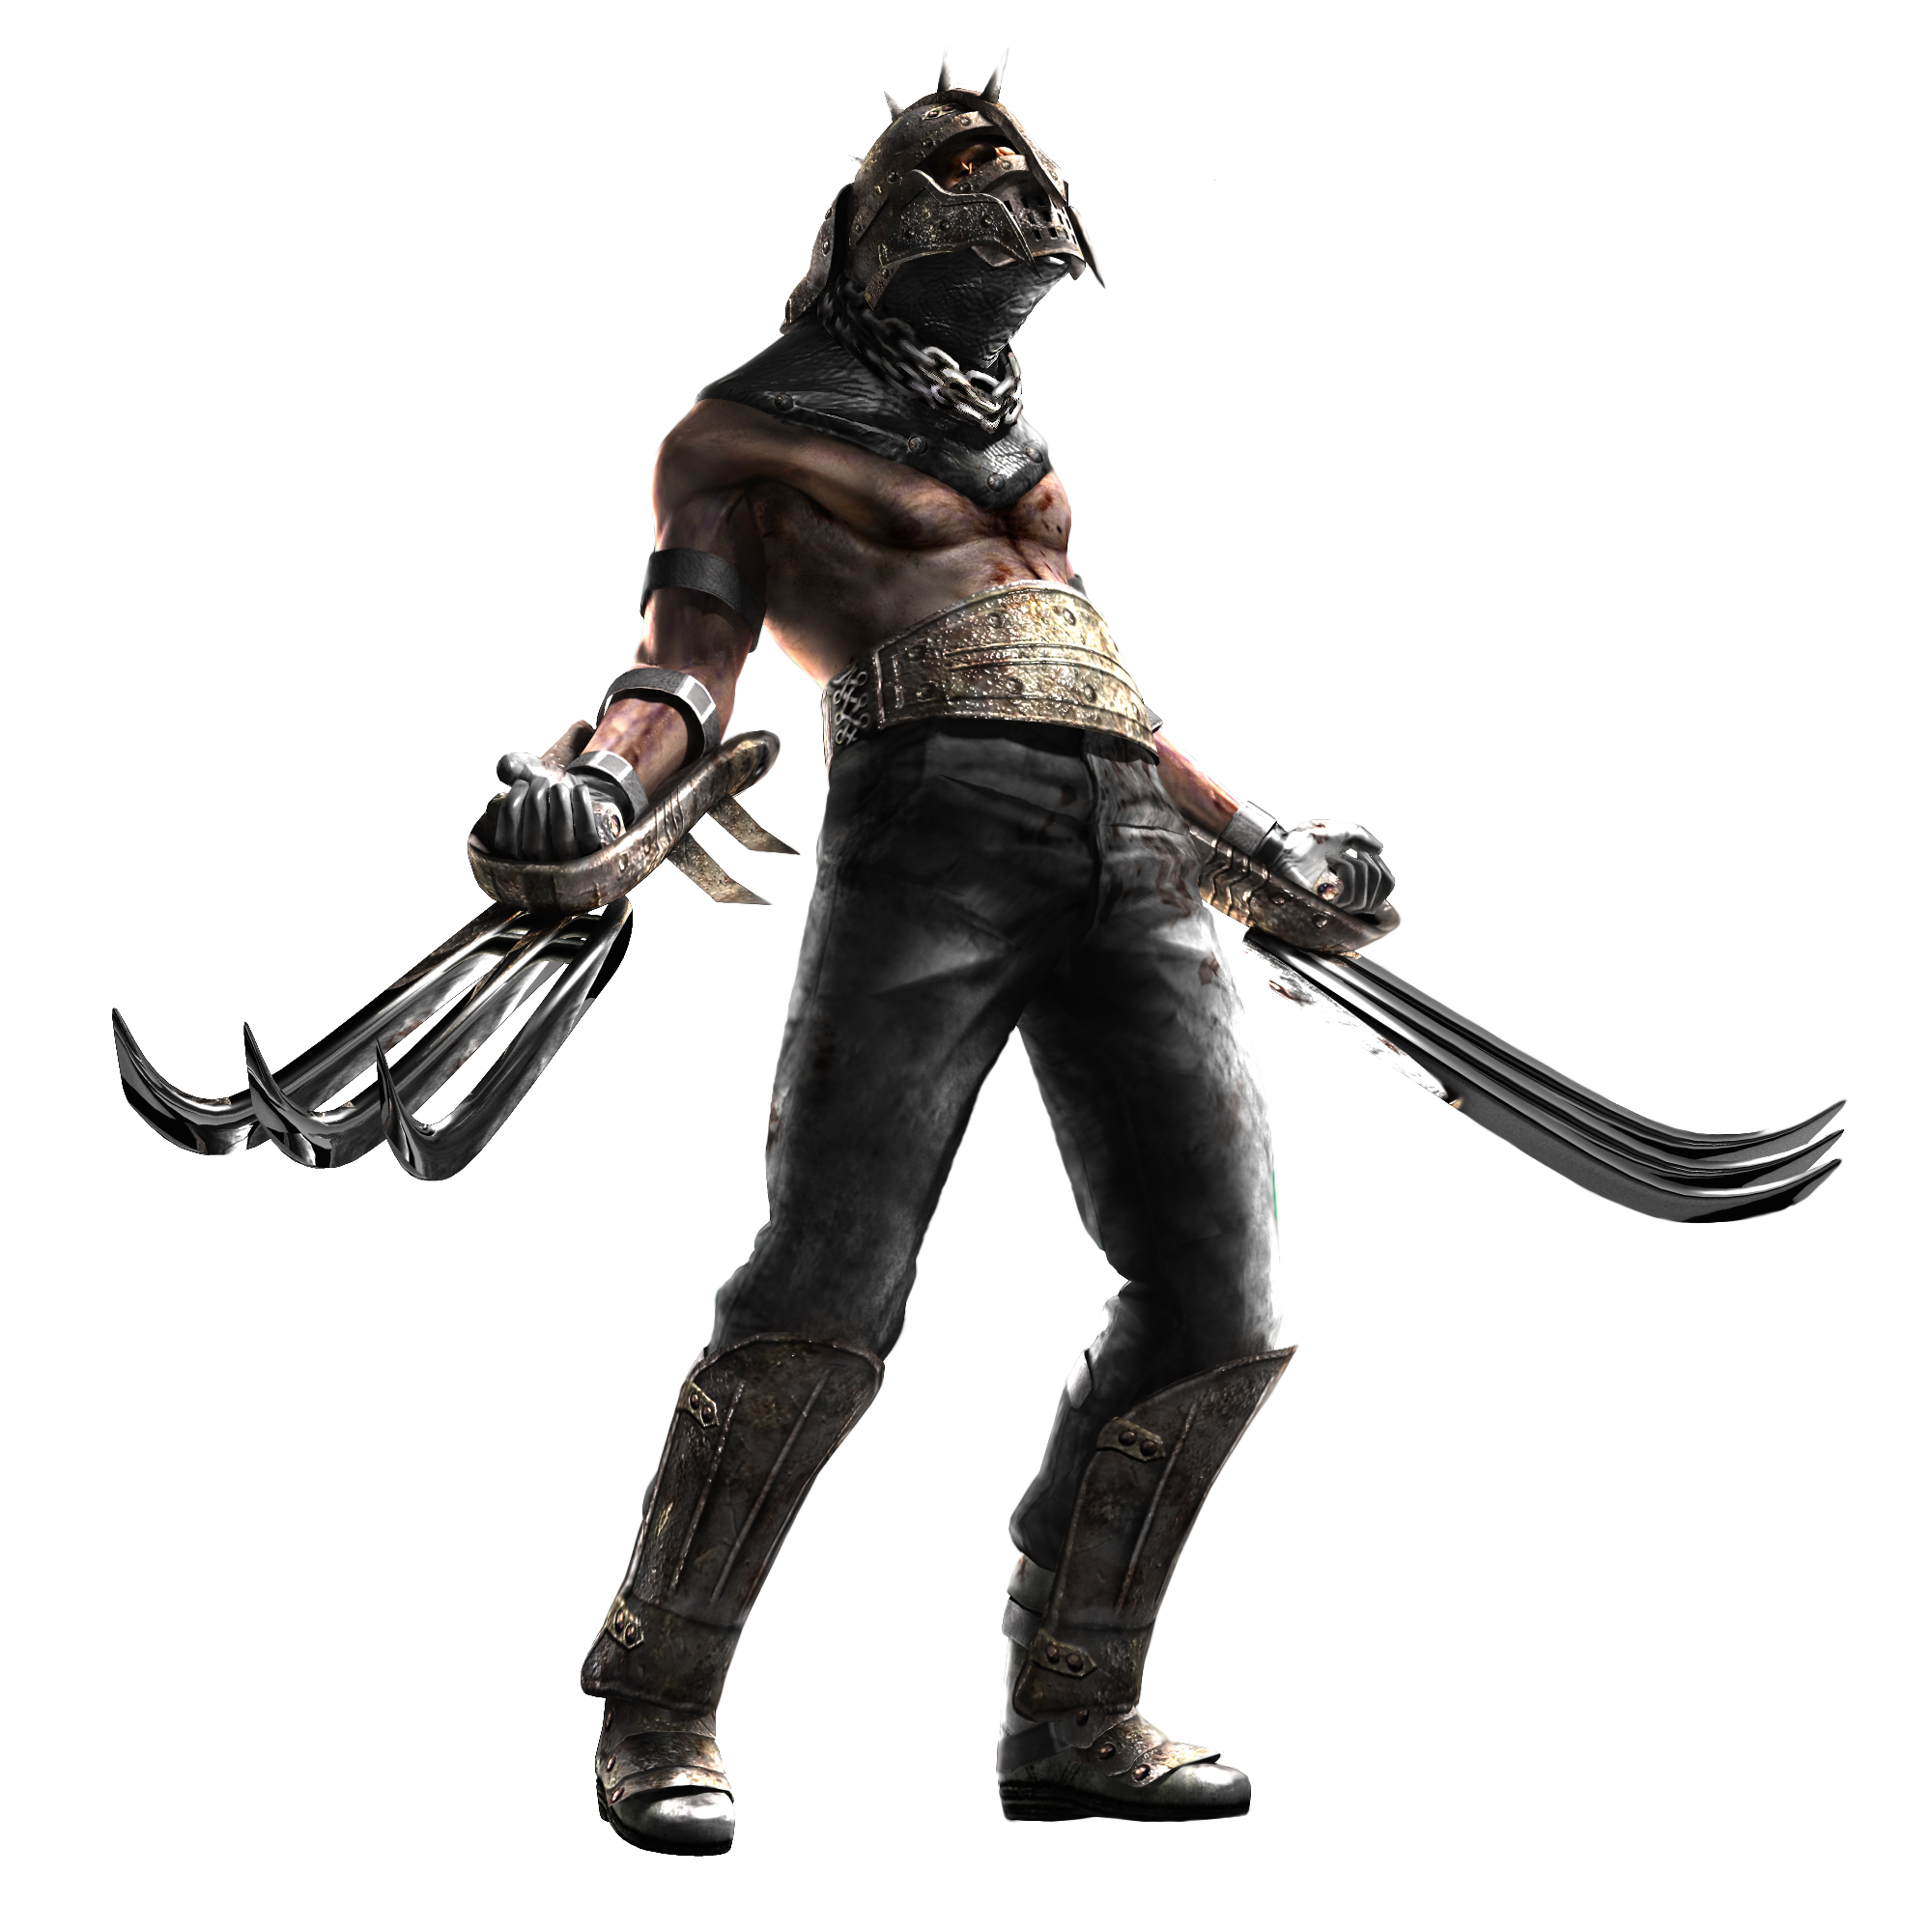 Resident Evil 4 remake: List of enemies and bosses